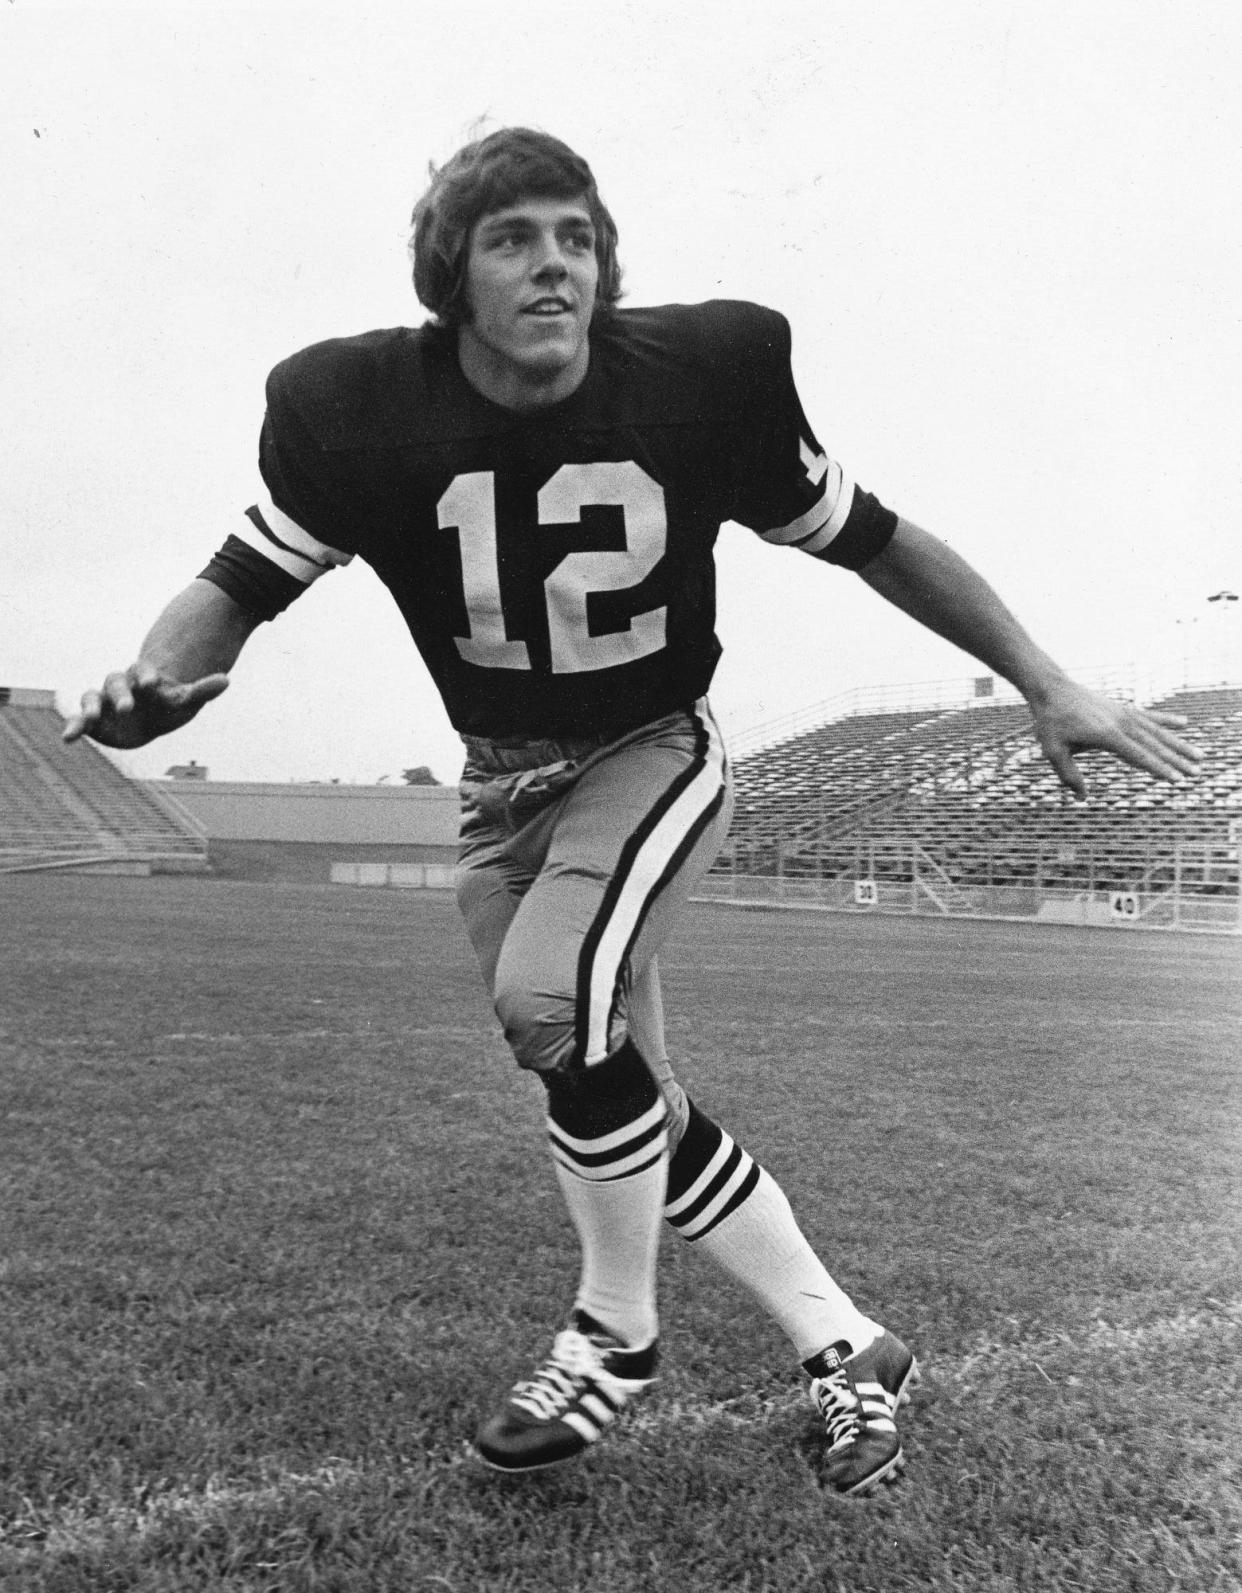 Kent State football player Nick Saban poses for a photo in an undated photo from either the 1971 or 1972 season